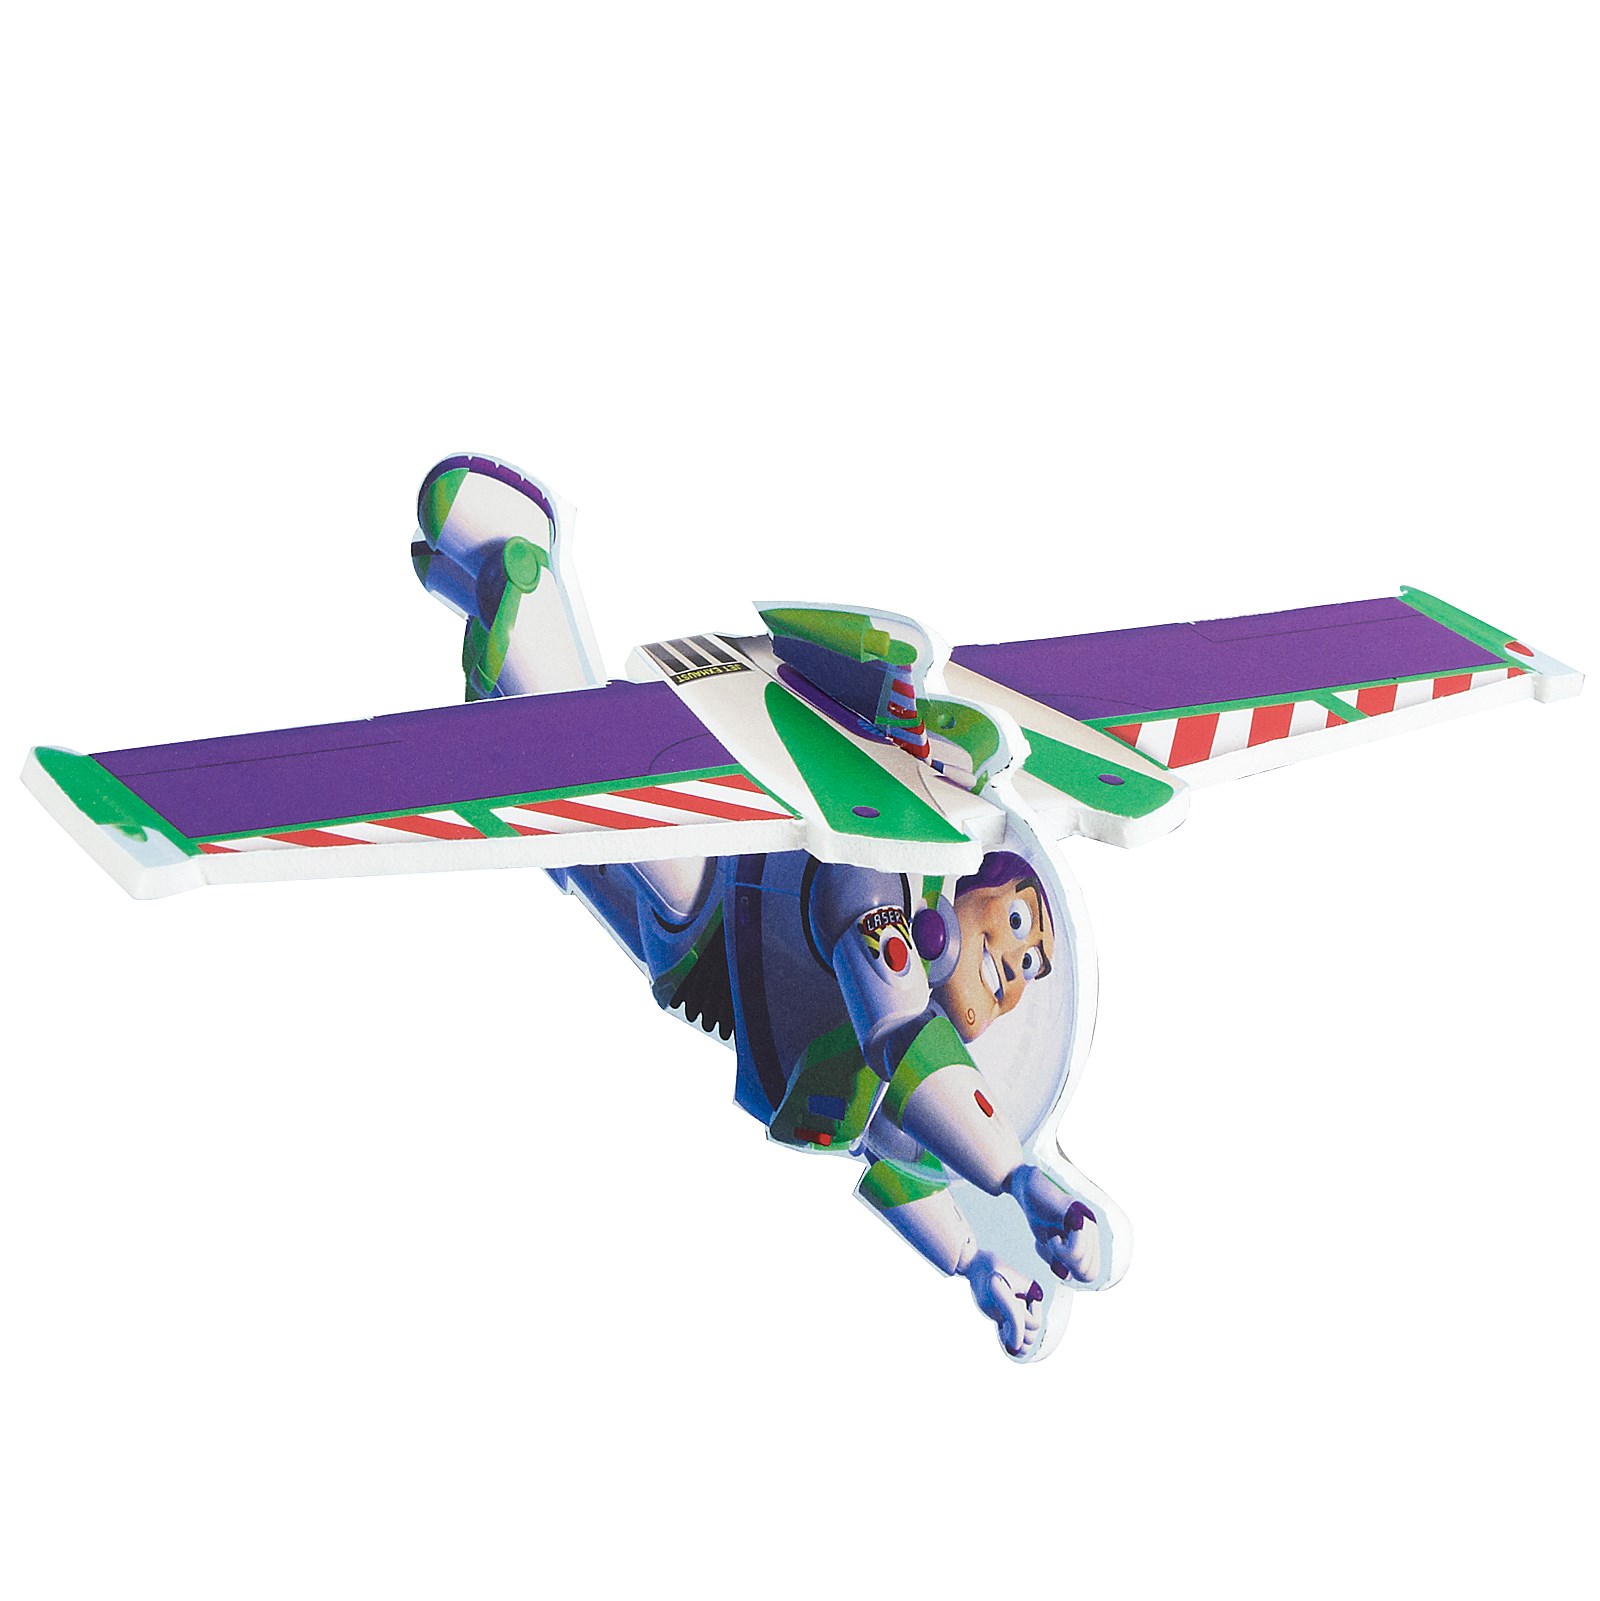 Toy Story 3 Foam Gliders 4 count